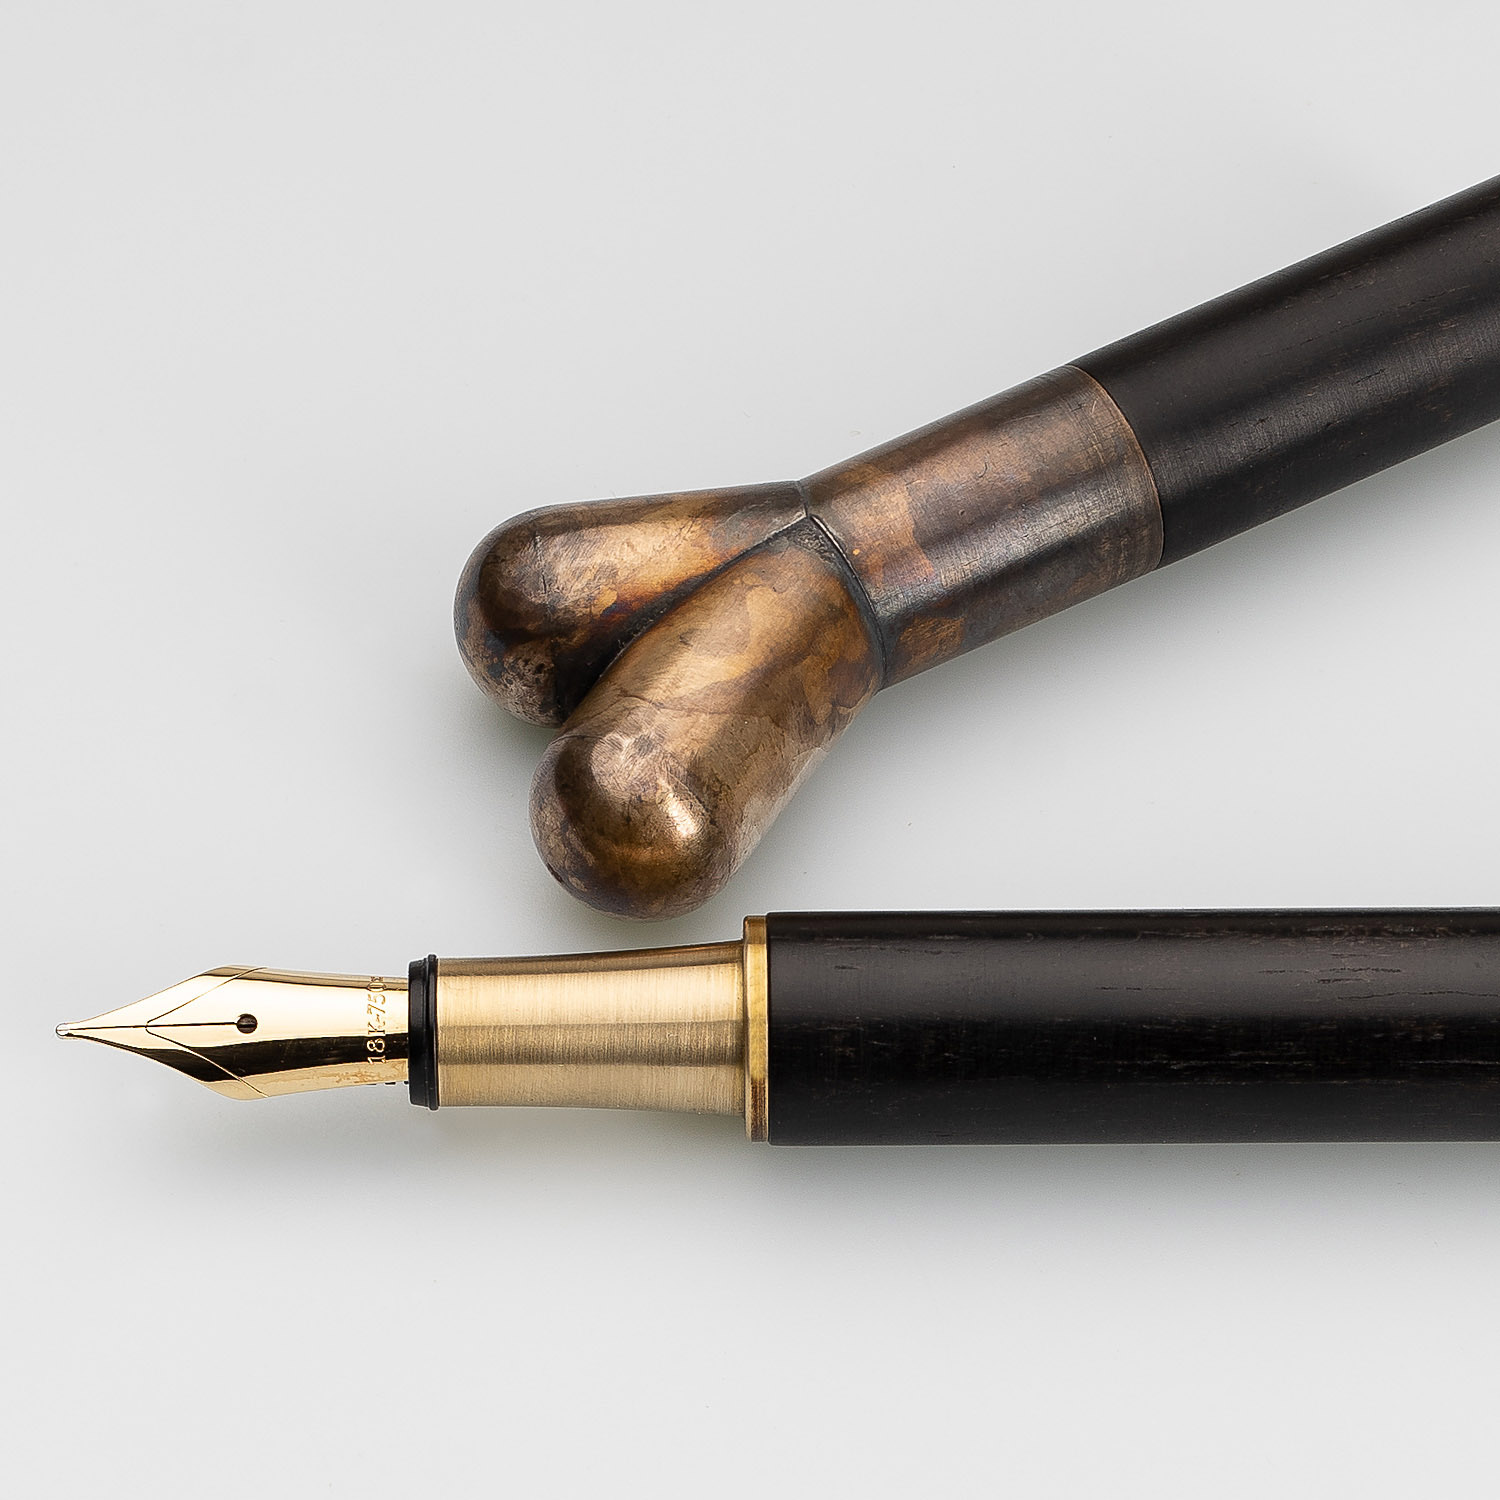 Fountainpen or piece of jewelry